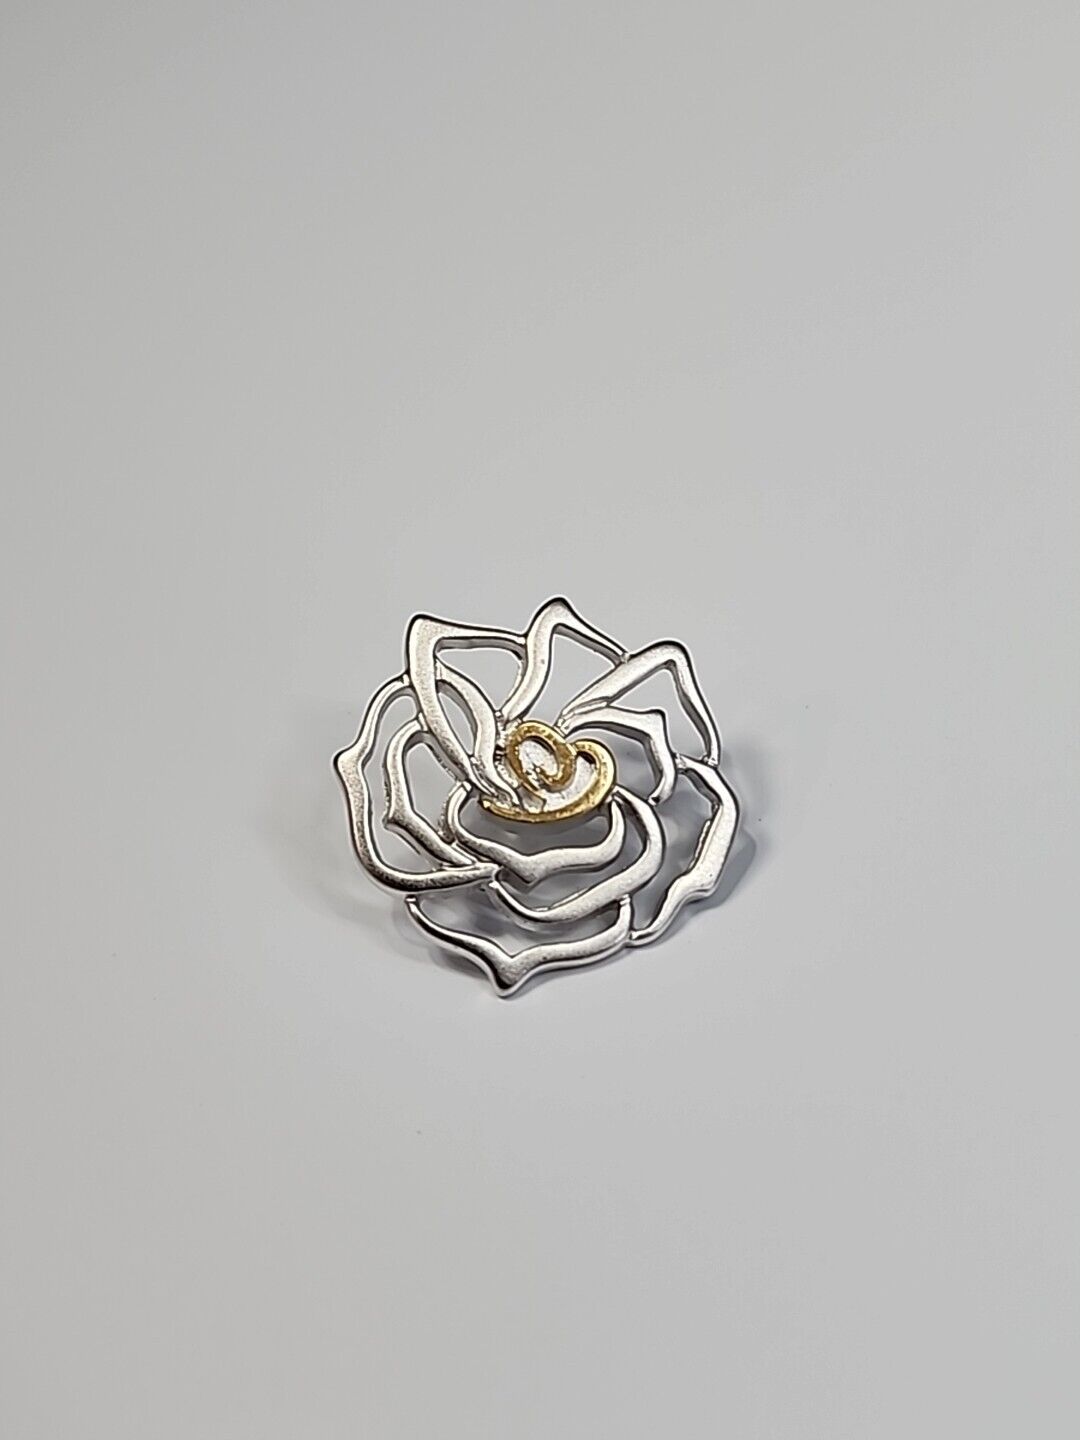 Heart & Rose Lapel Pin Small Gold Color Heart on a Silver Matte Finish Flower